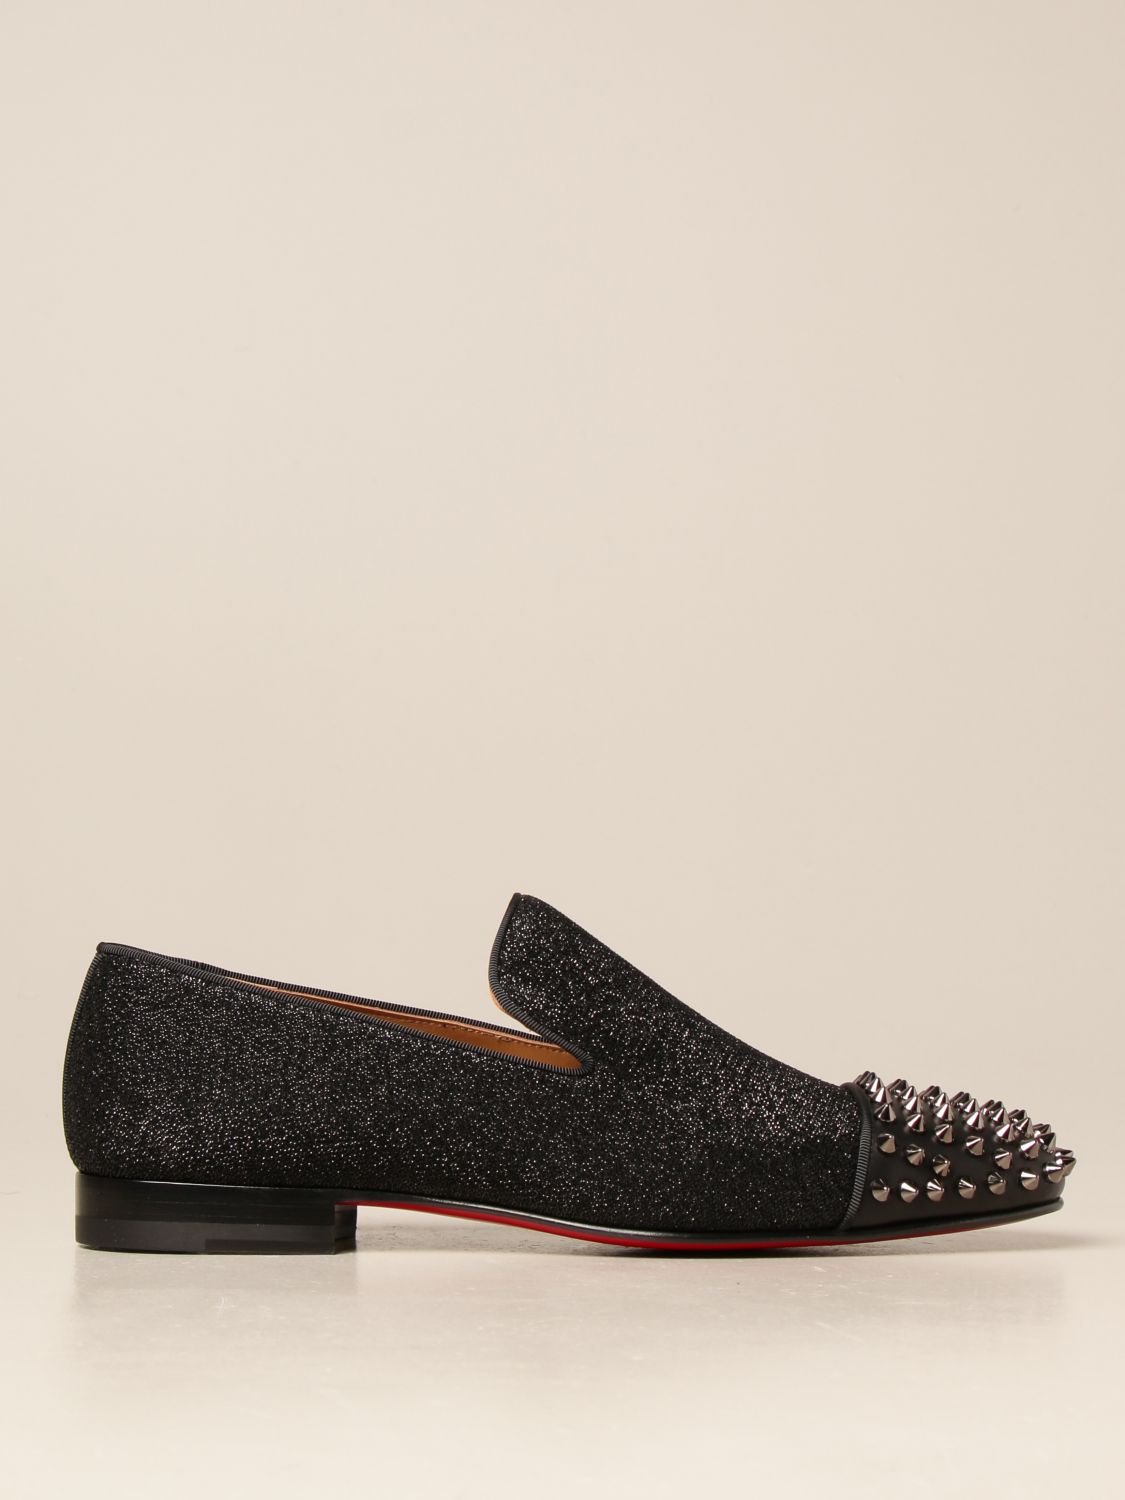 Spooky flat Christian Louboutin moccasin with studs